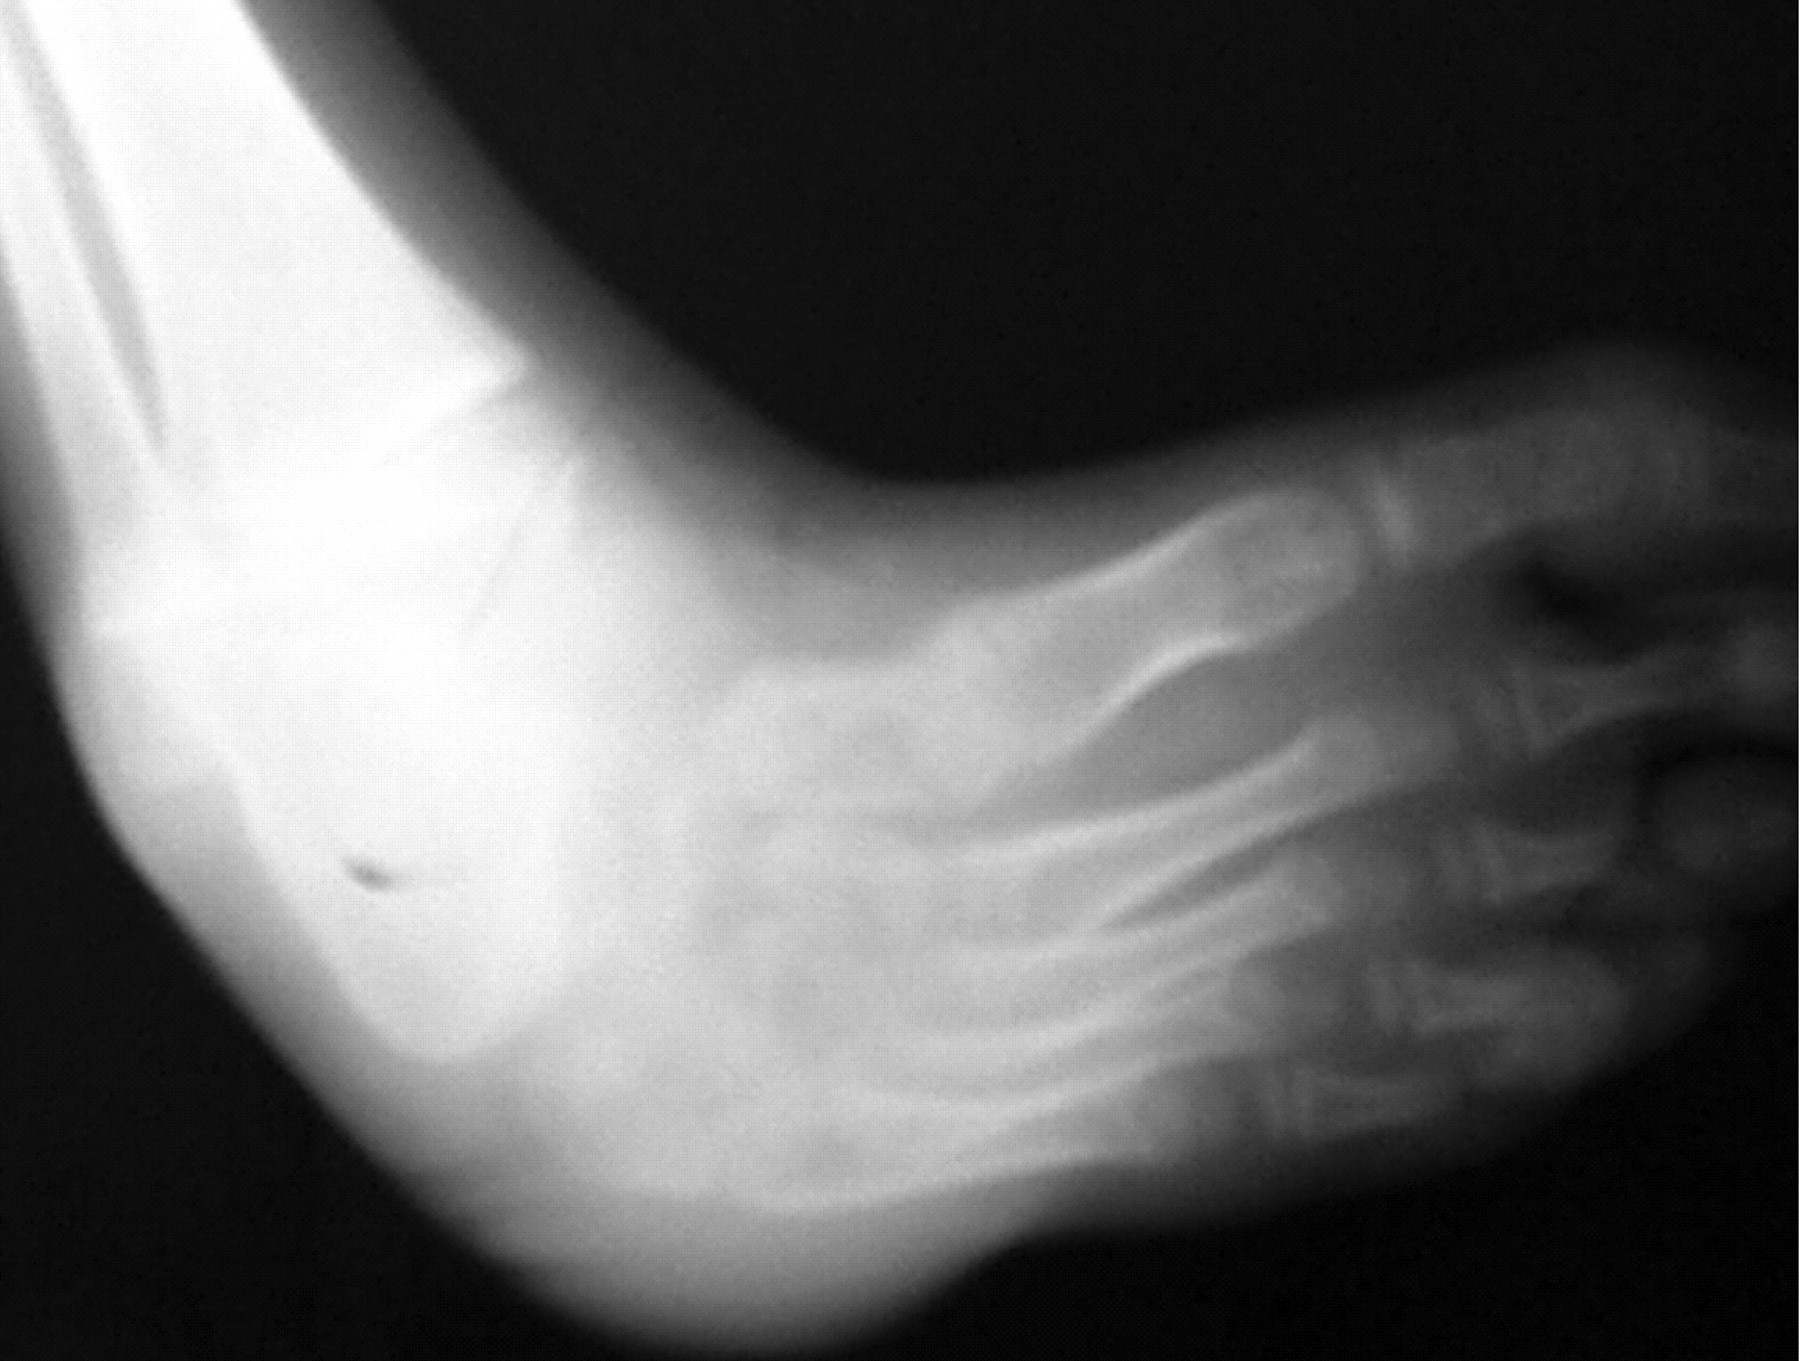 Fig. 3a, Fig. 3b, Fig. 3c  
            Radiographs a) before treatment showing the severe deformity of the foot, b) a lateral view with good alignment of the foot and mild flattening of the talus at three years, and c) an anterolateral view with correction of the forefoot at three years. There is minimal residual medial displacement of the navicular with satisfactory alignment on the head of the talus.
          